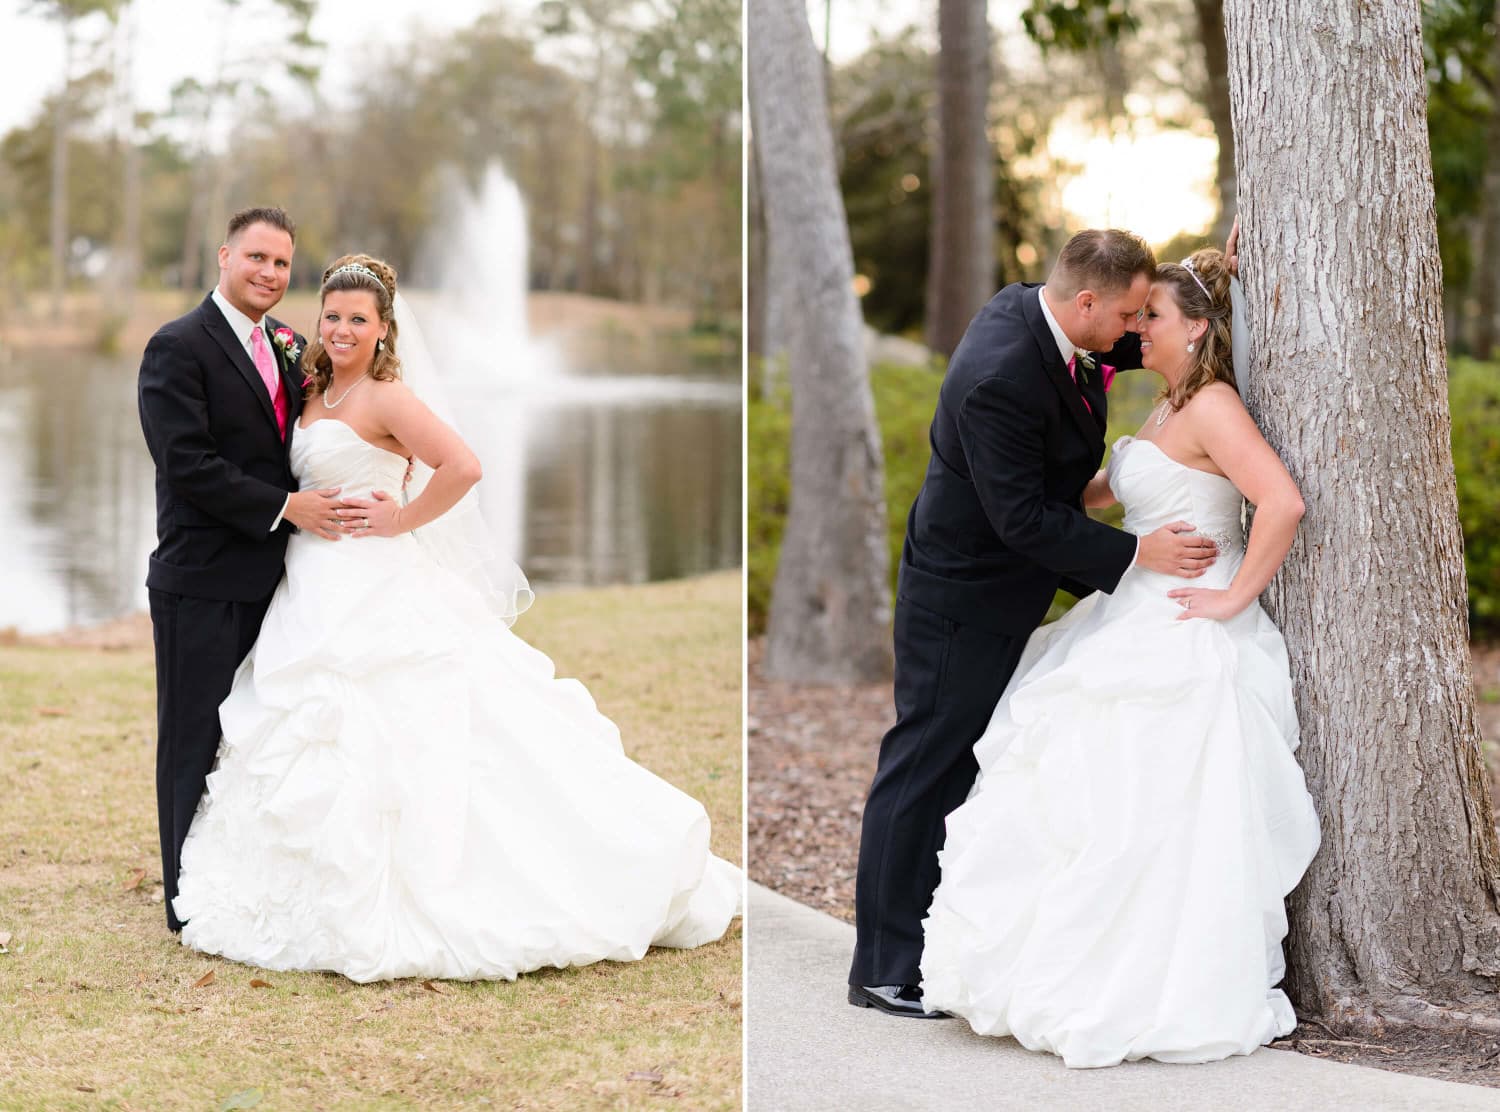 Wedding portraits by the lake